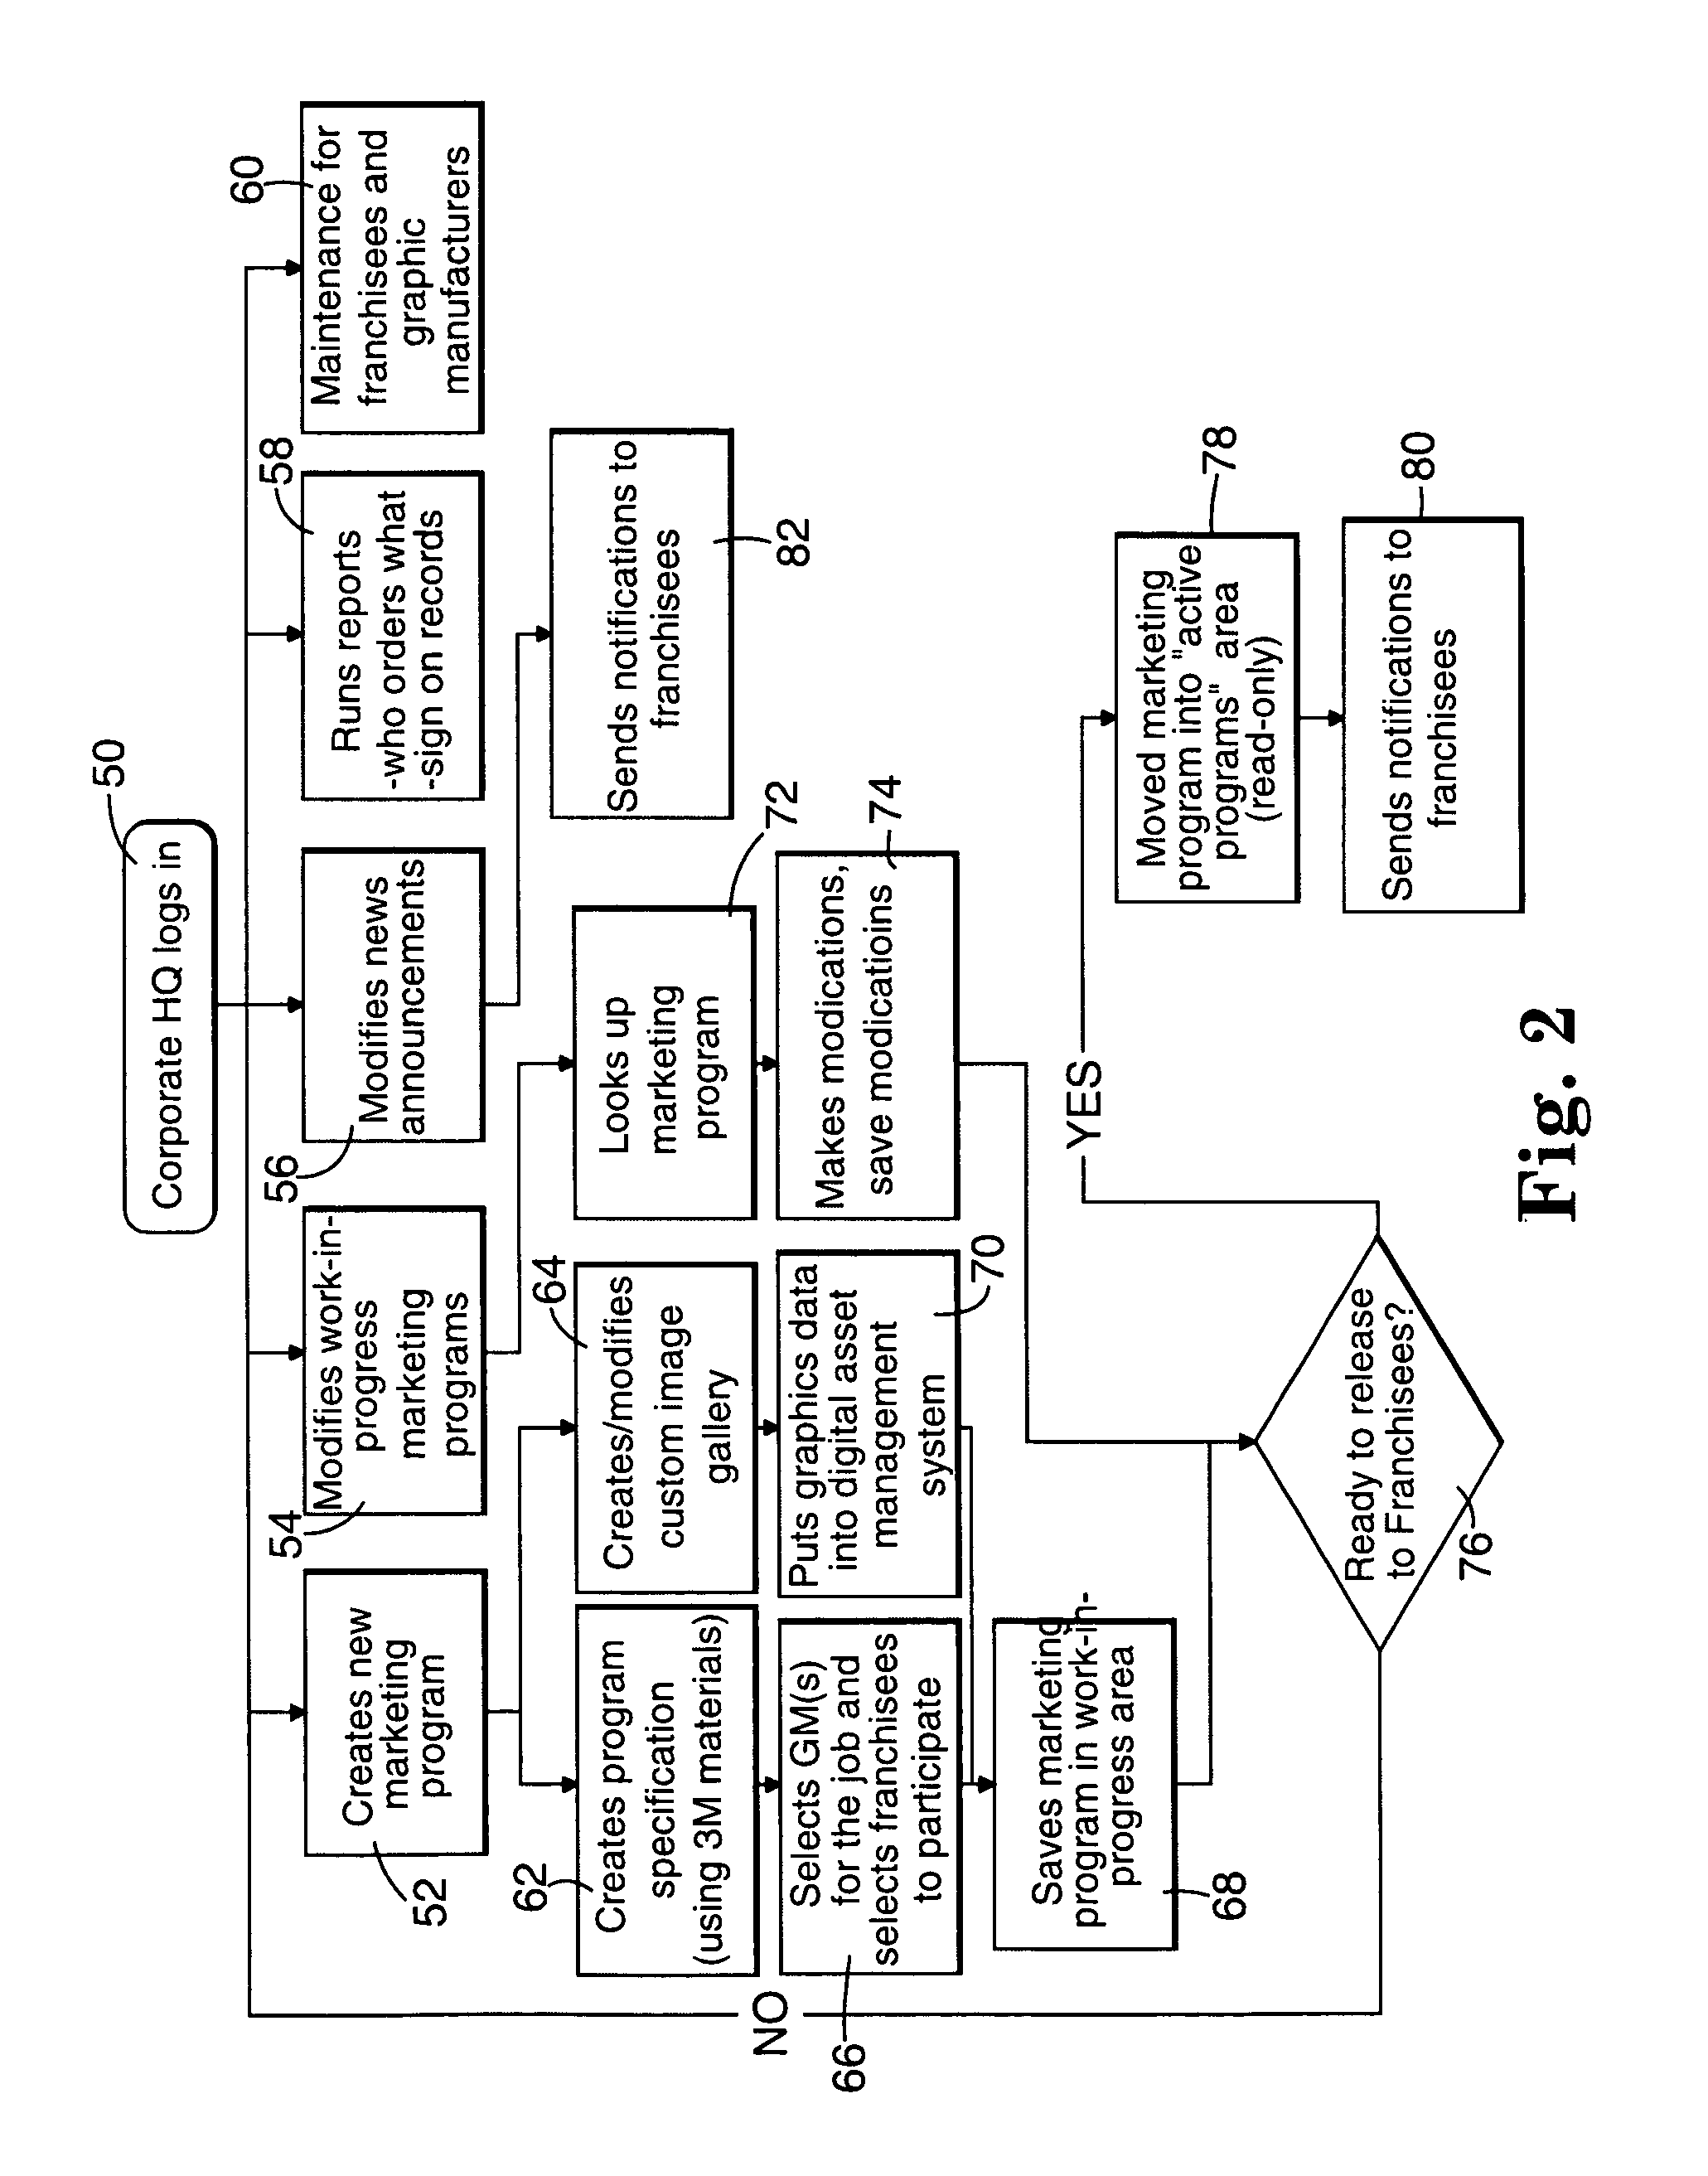 System for third party management of product manufacture ordering by a franchise based upon approved products of franchisor